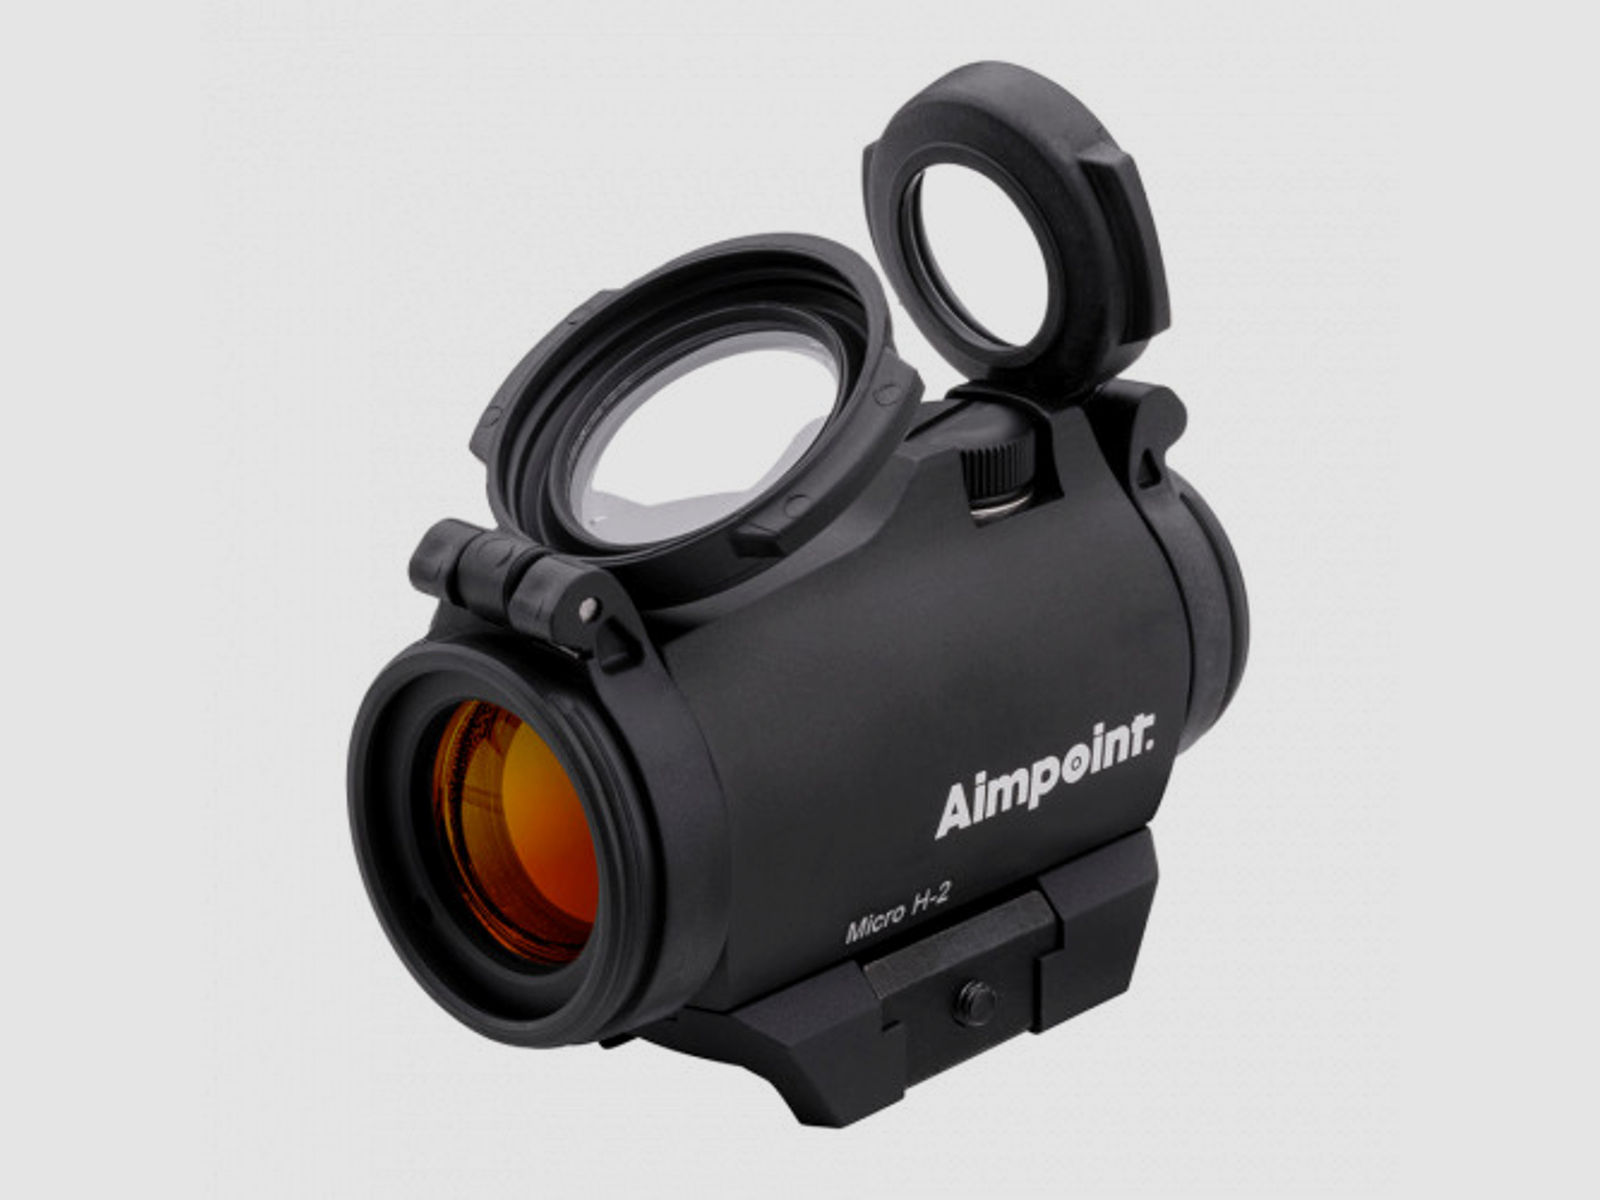 Aimpoint Micro H-2 2 MOA inkl. Adapter für Weaver/Picatinny